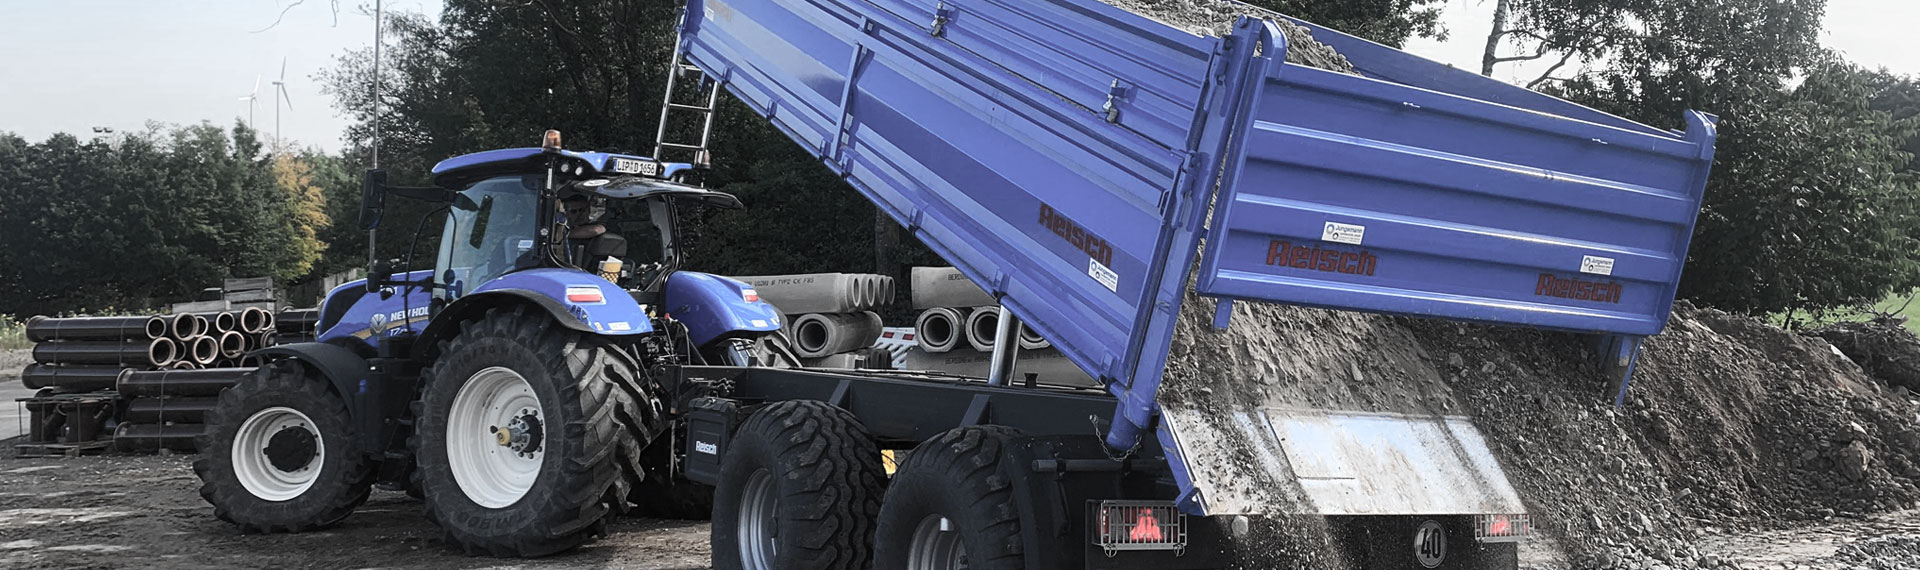 A blue tipper truck with body built in Hardox® sheet steel, dumping out a load of rocks.